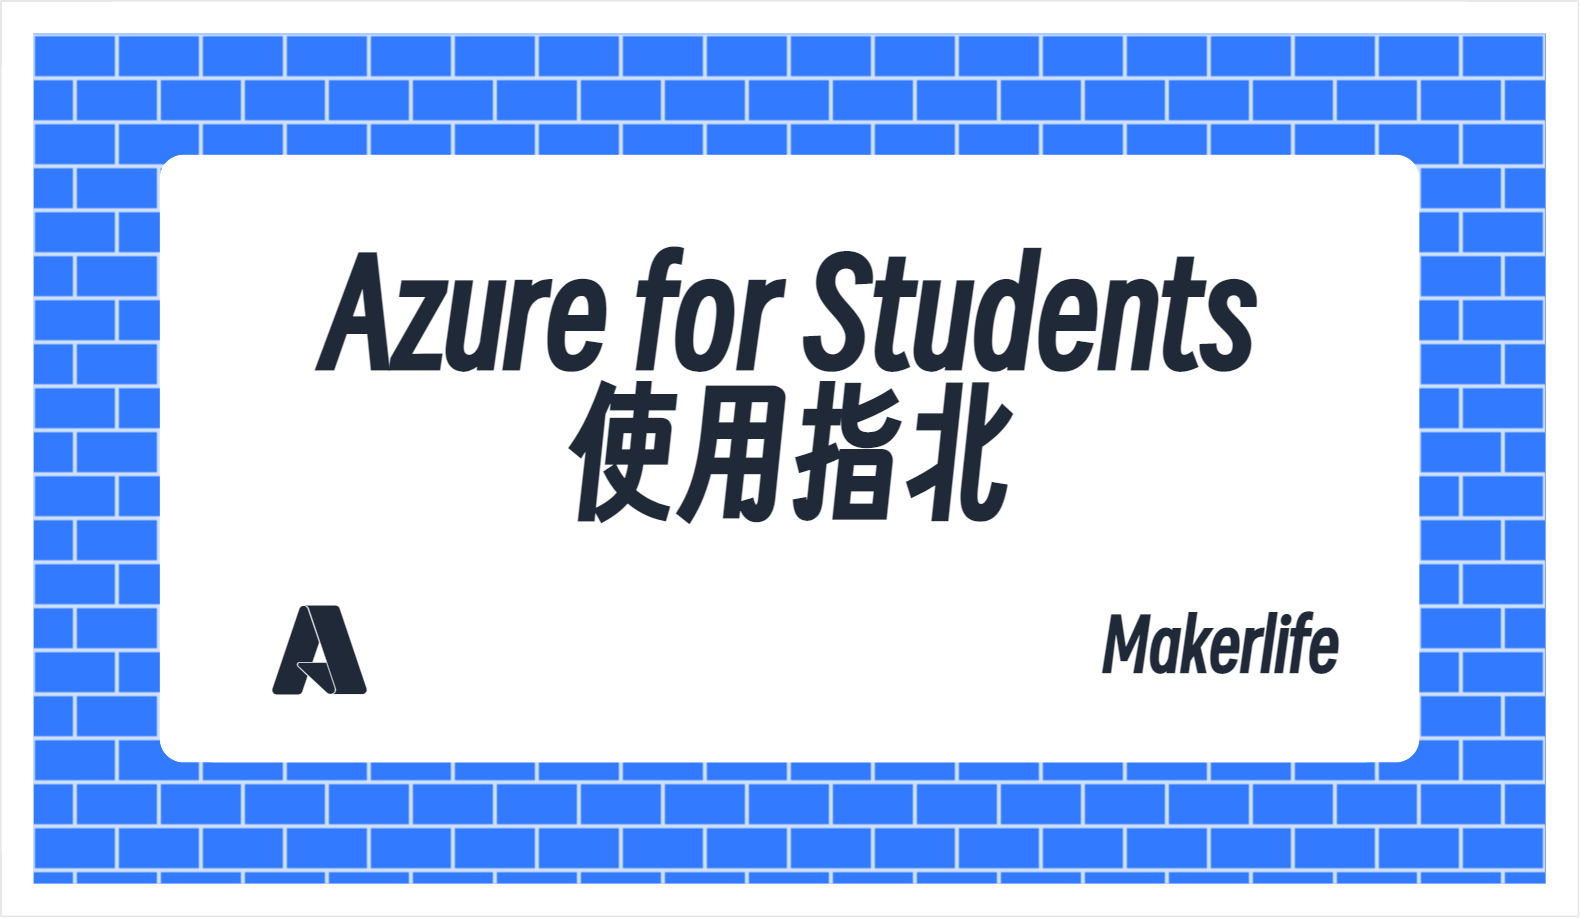 Azure for Students 使用指北